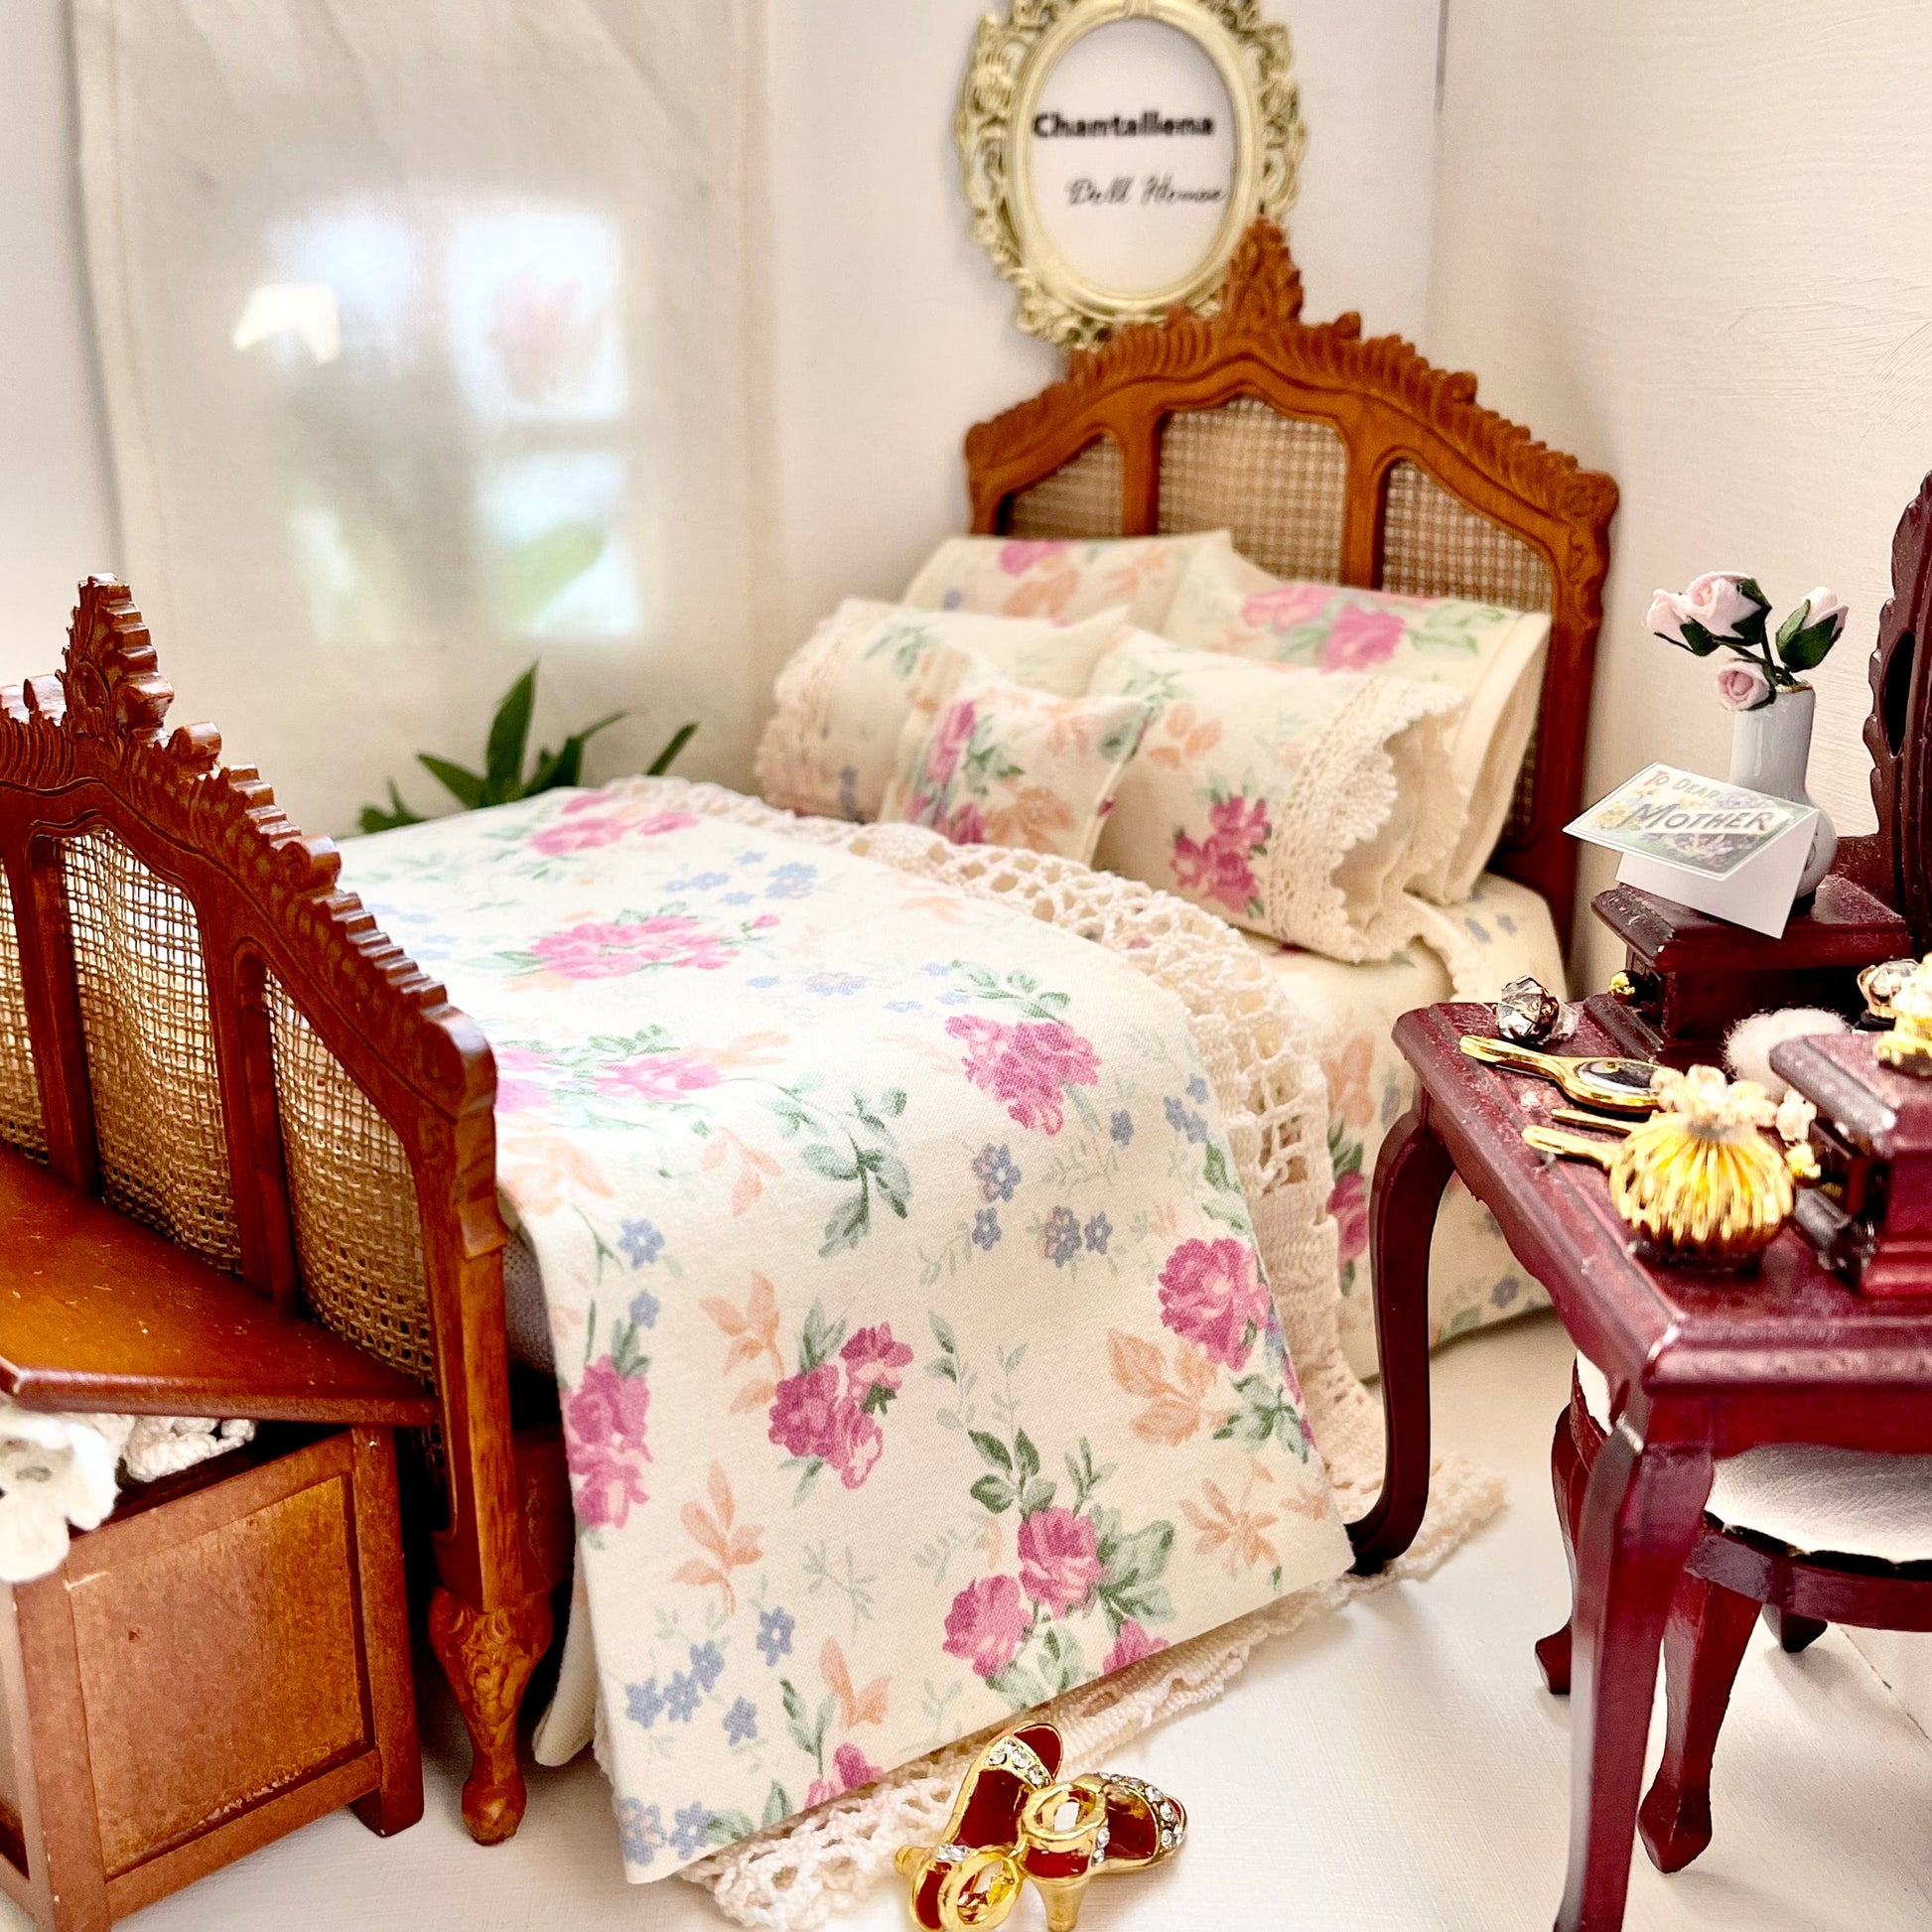 Chantallena Dollhouse Accessories Country Weekend | Pale Yellow and Red Roses Cotton Bedding Set 1:12 Scale | Kaylyn